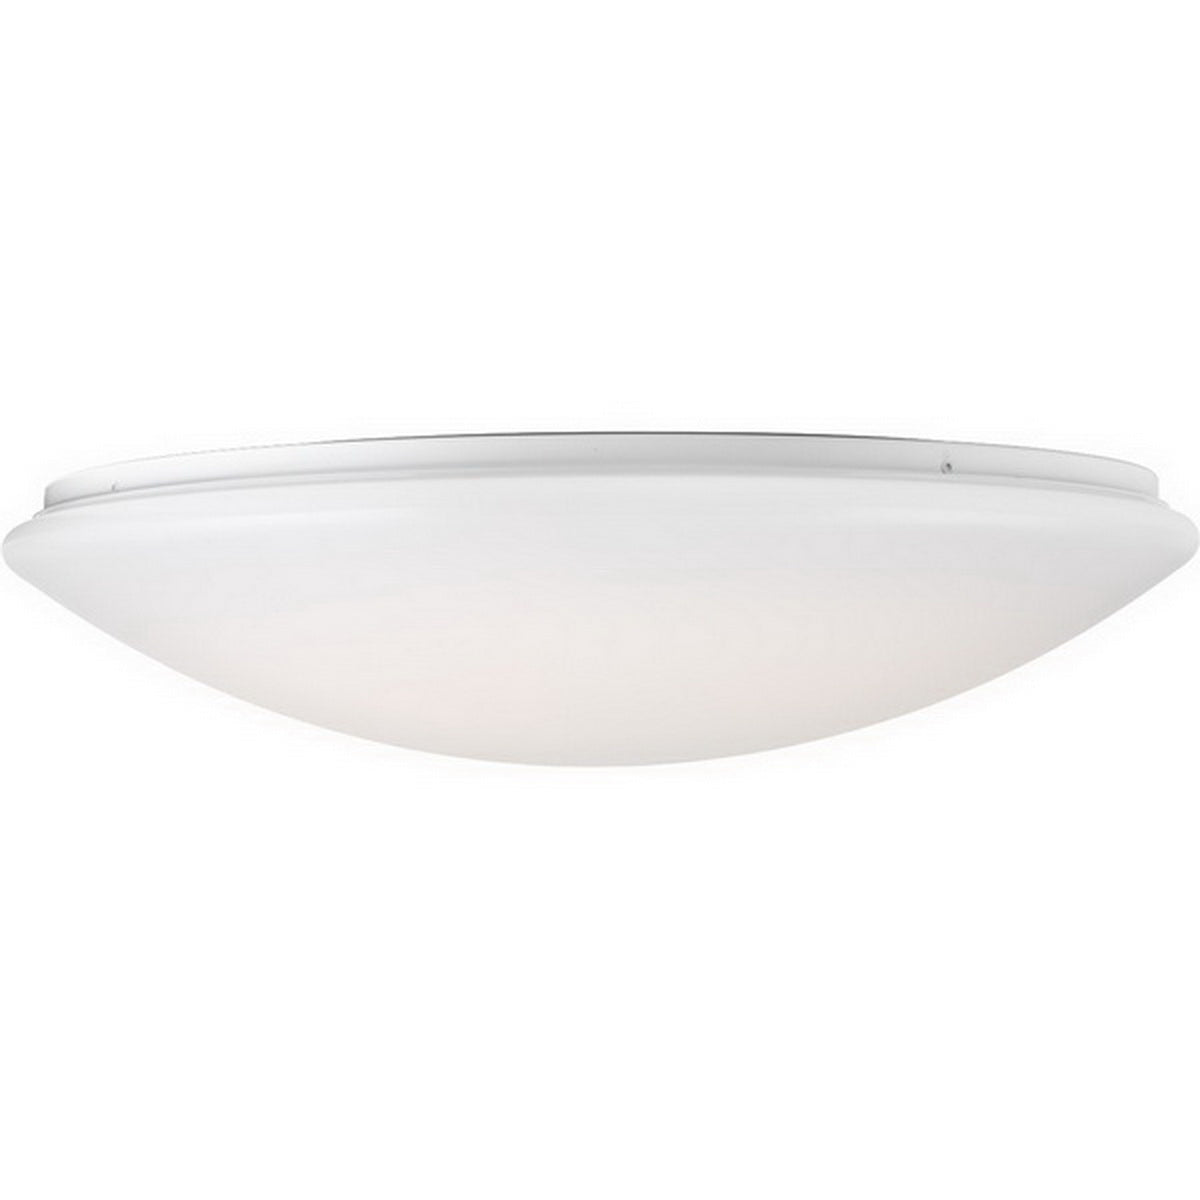 Drums and Clouds 17 in LED Ceiling Puff Light 3000 Lumens 3000K White finish - Bees Lighting